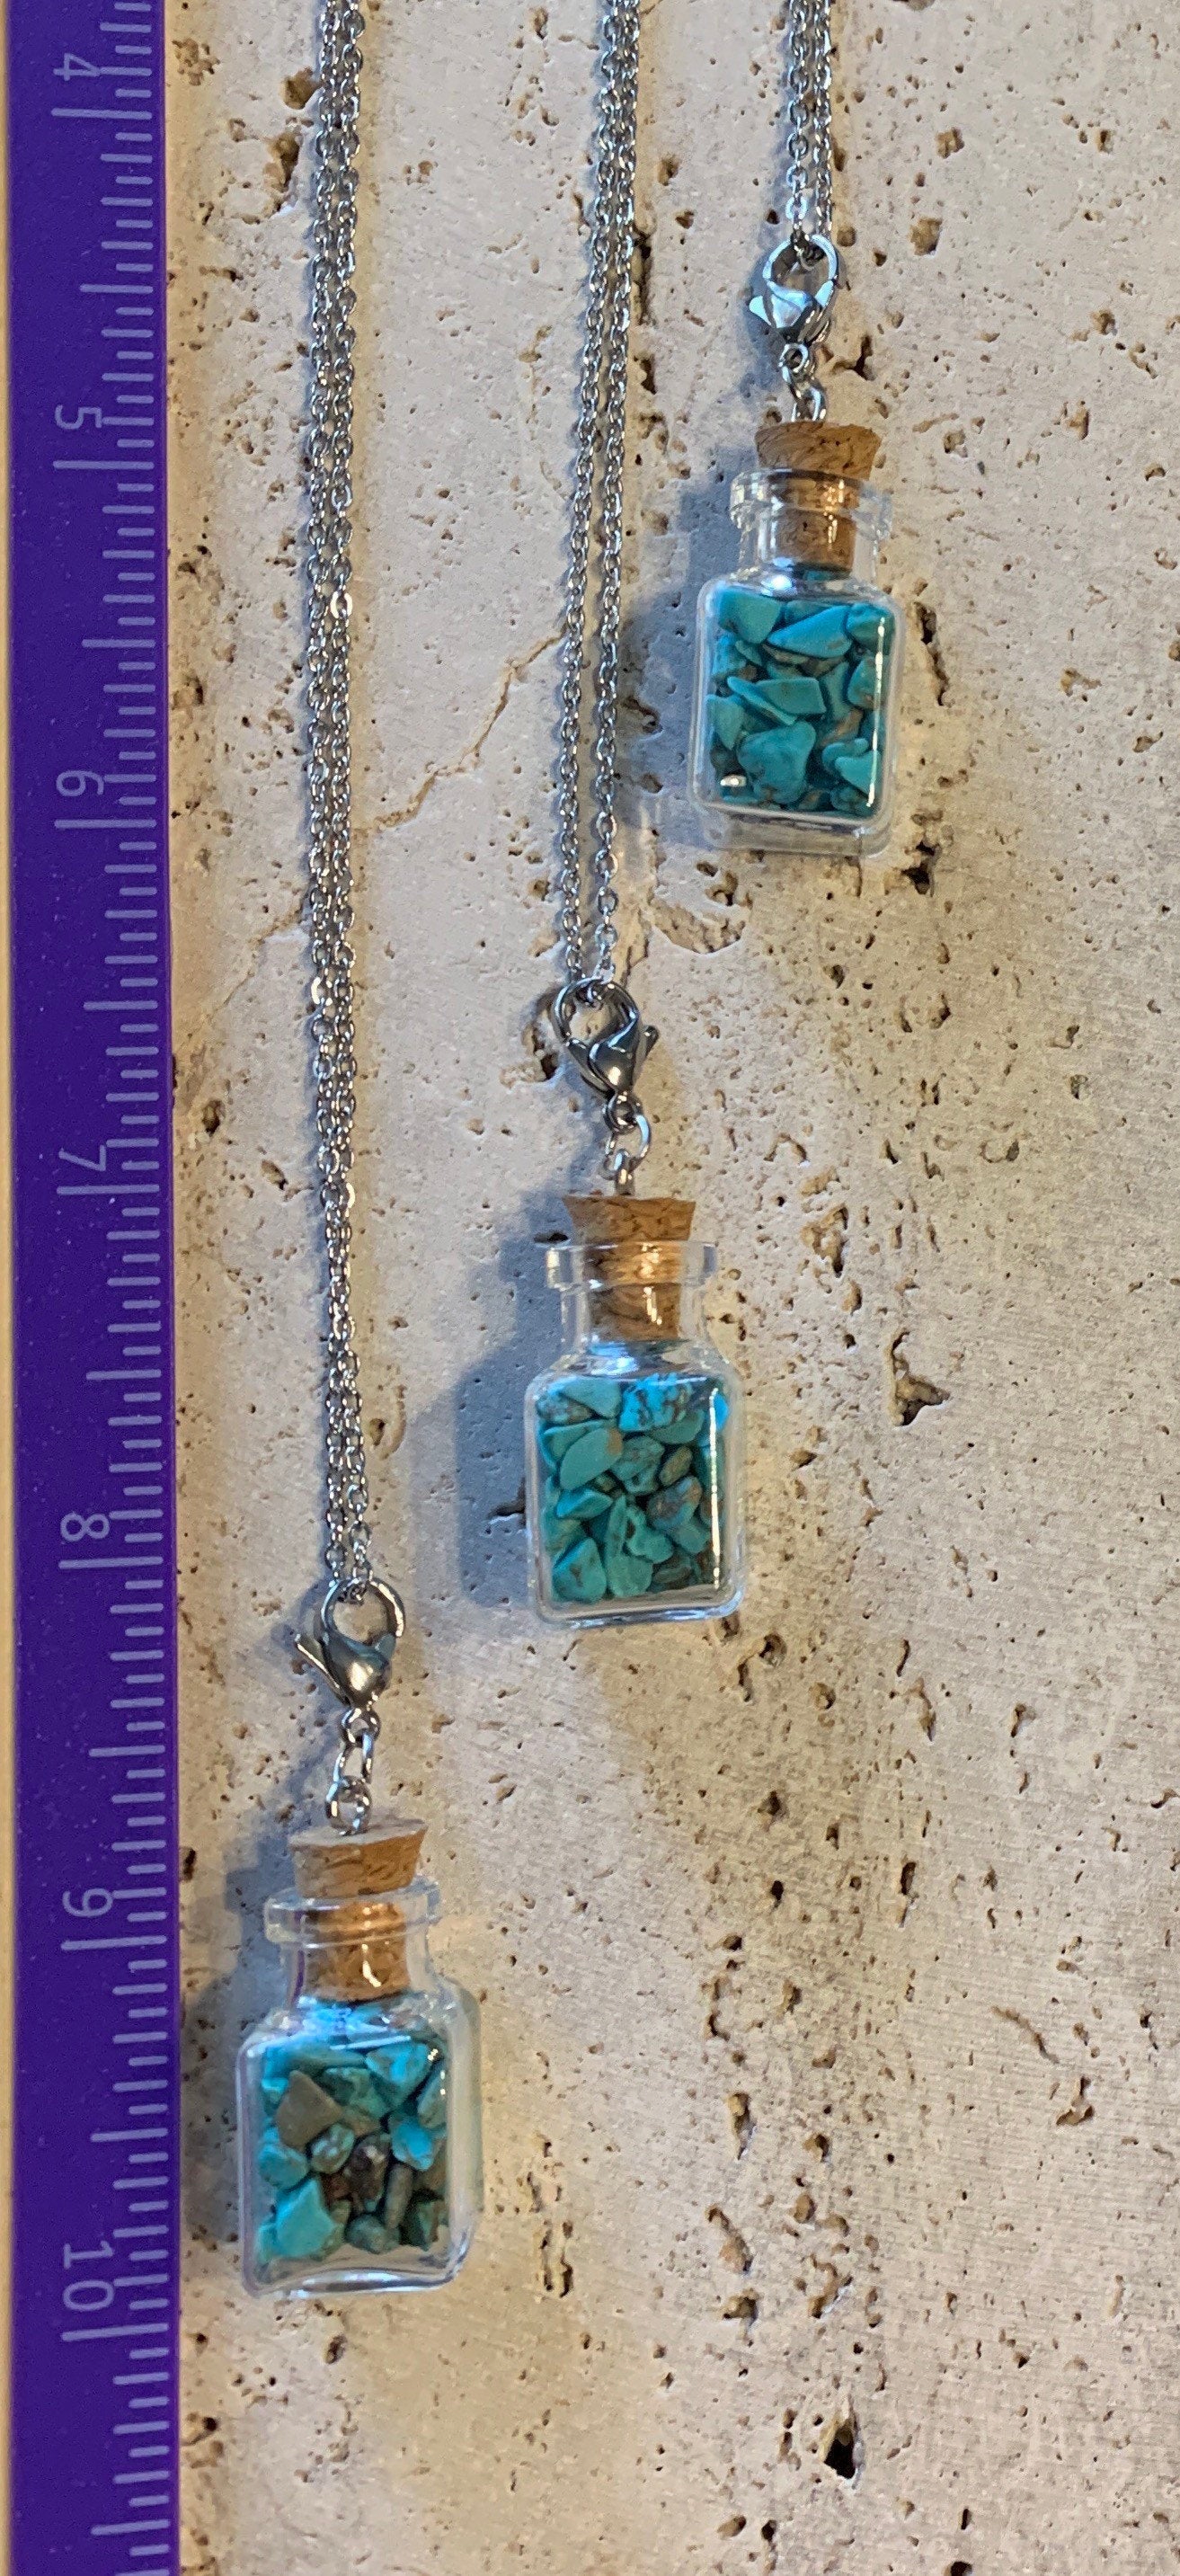 Blue Howlite Necklace 1075 In square corked bottle. 20” chain.